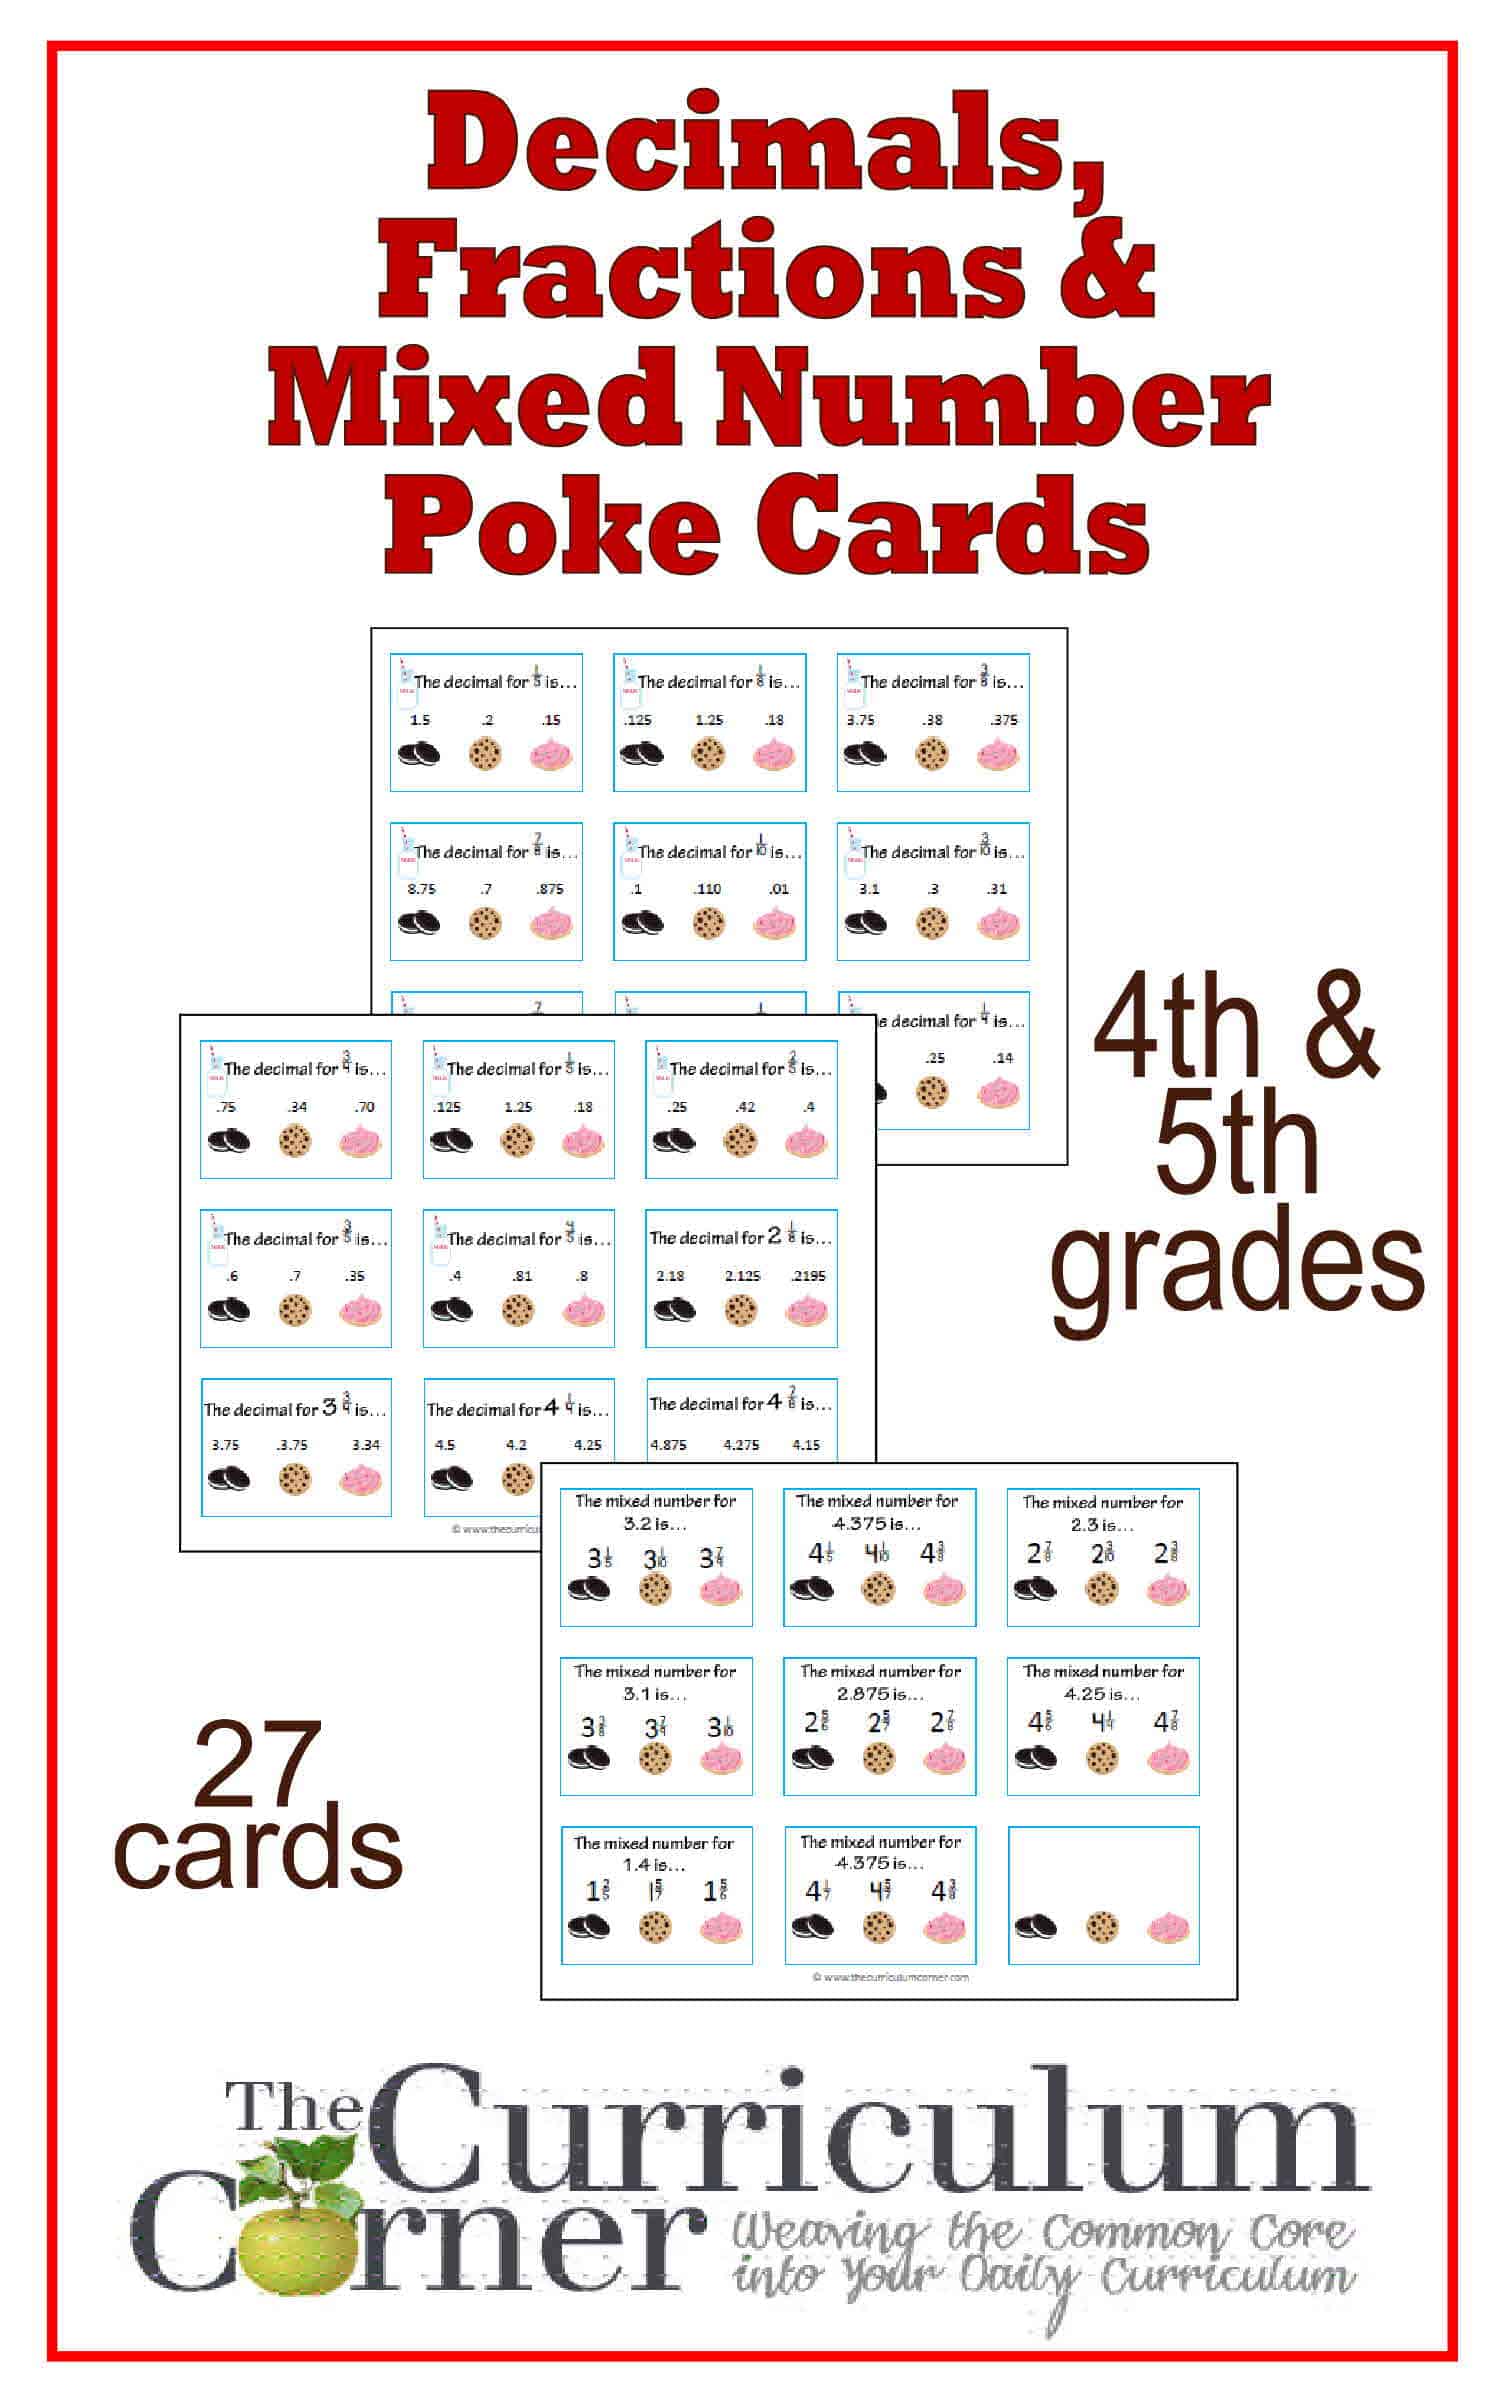 decimals-fractions-mixed-numbers-poke-cards-the-curriculum-corner-4-5-6